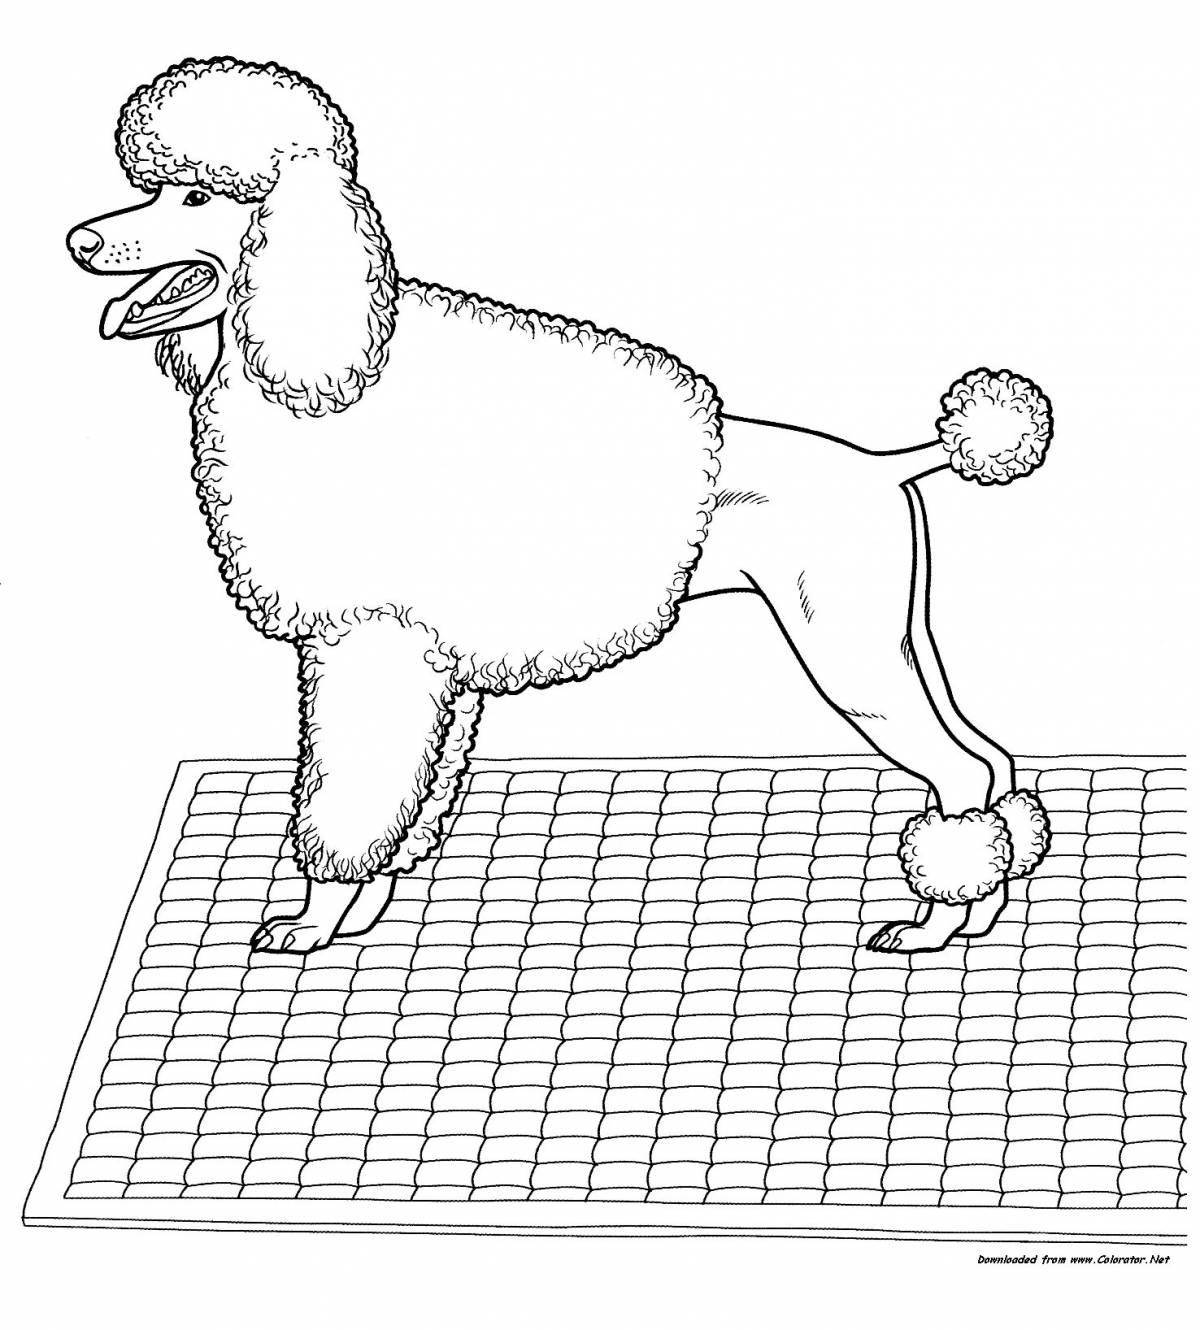 Fabulous poodle coloring pages for kids